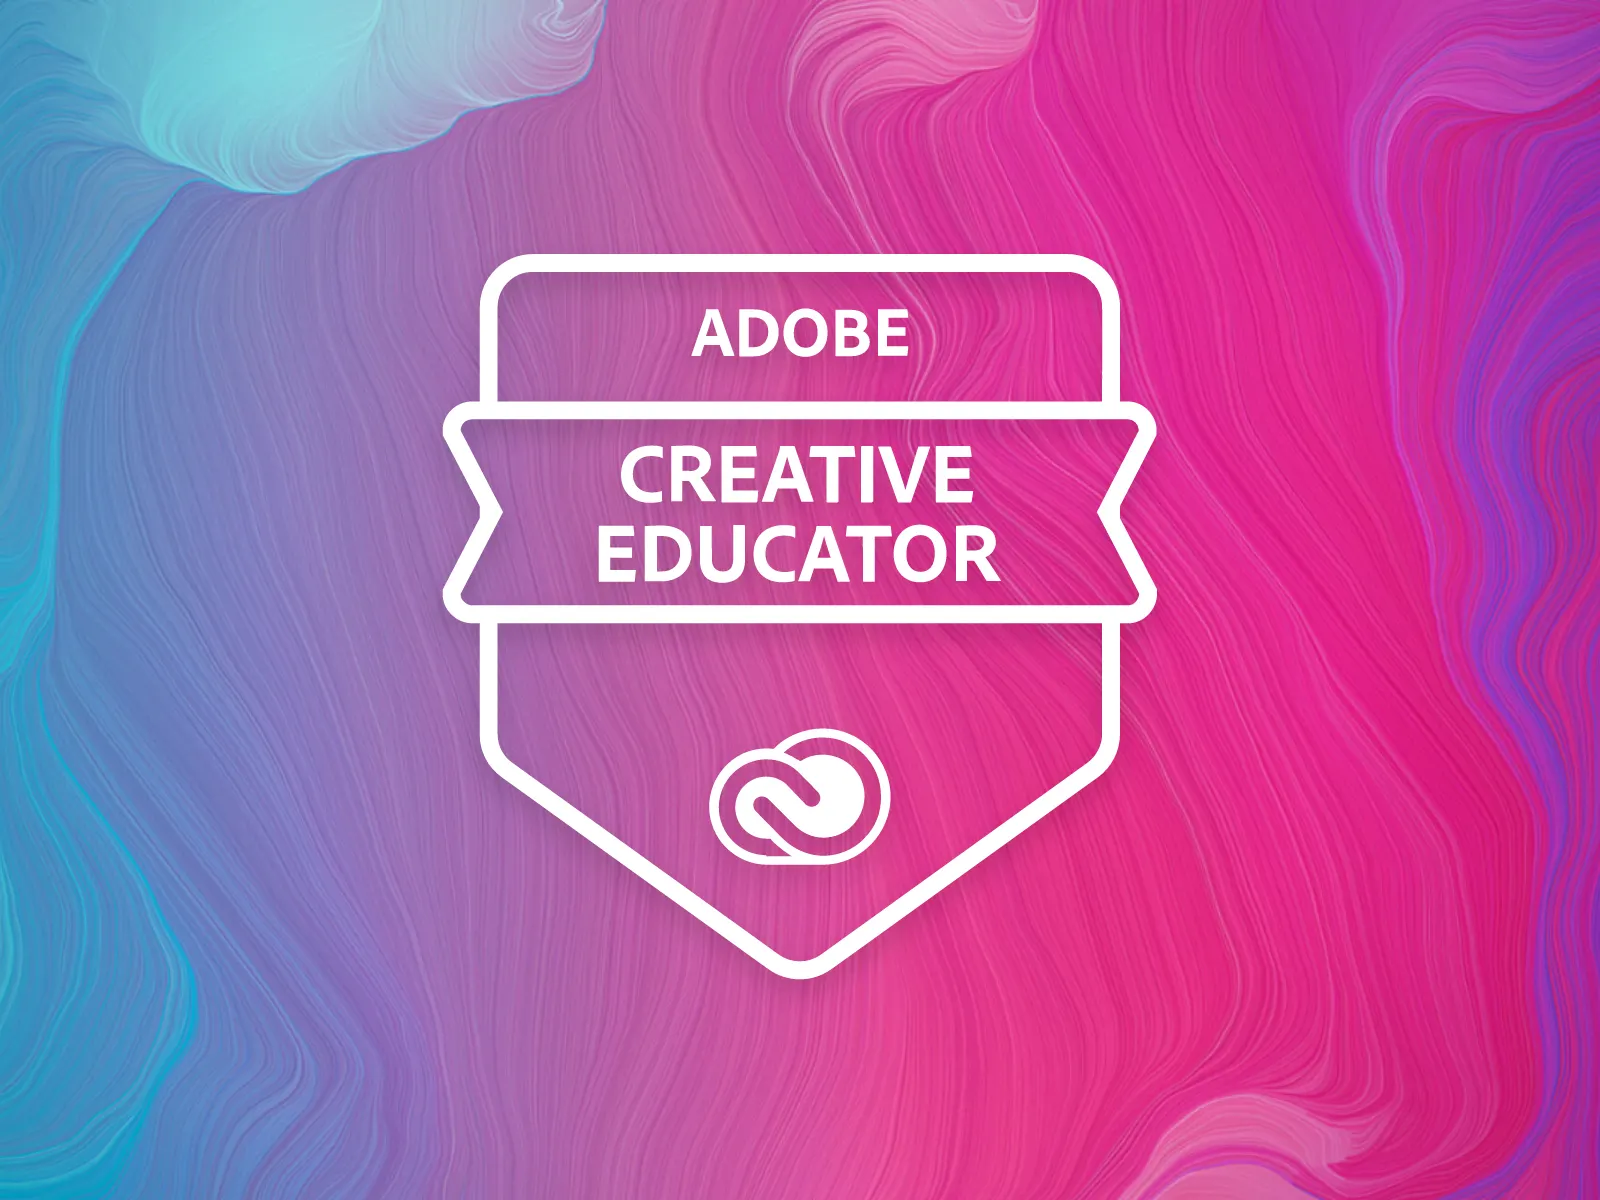 Want to share your Adobe Express projects and ideas with others, and discover how to get the most from Adobe apps in your classroom? Join our Creative Educator community to earn badges and be part of the movement to bring creativity to every classroom